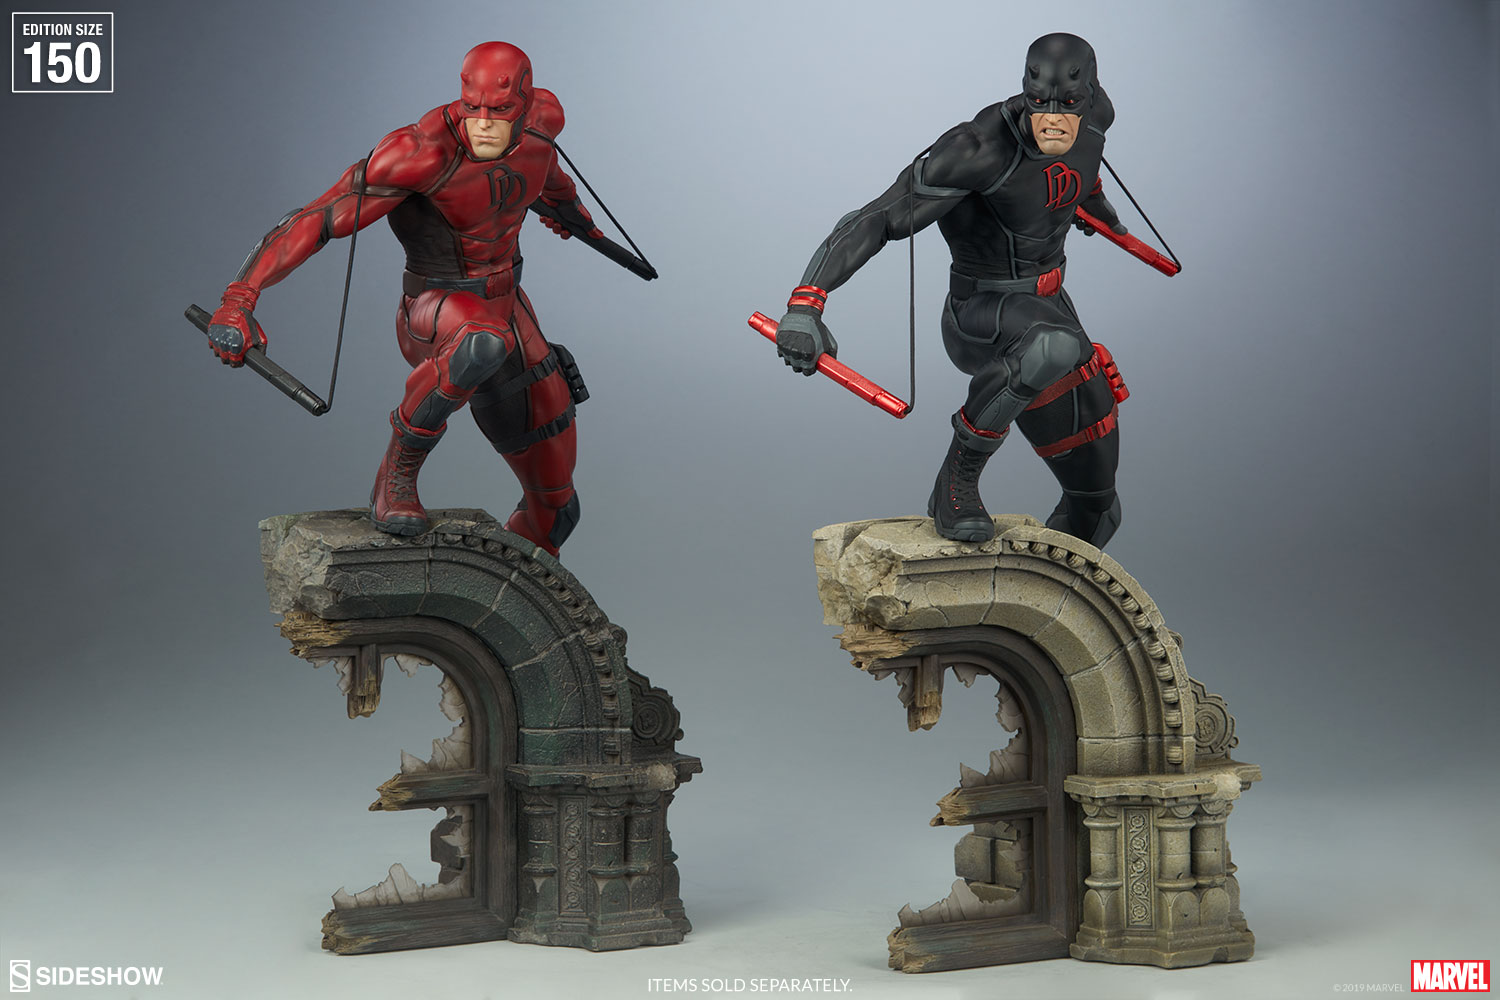 https://www.sideshow.com/storage/product-images/3005392/daredevil-shadowlands_marvel_gallery_5ce6d419b56b7.jpg